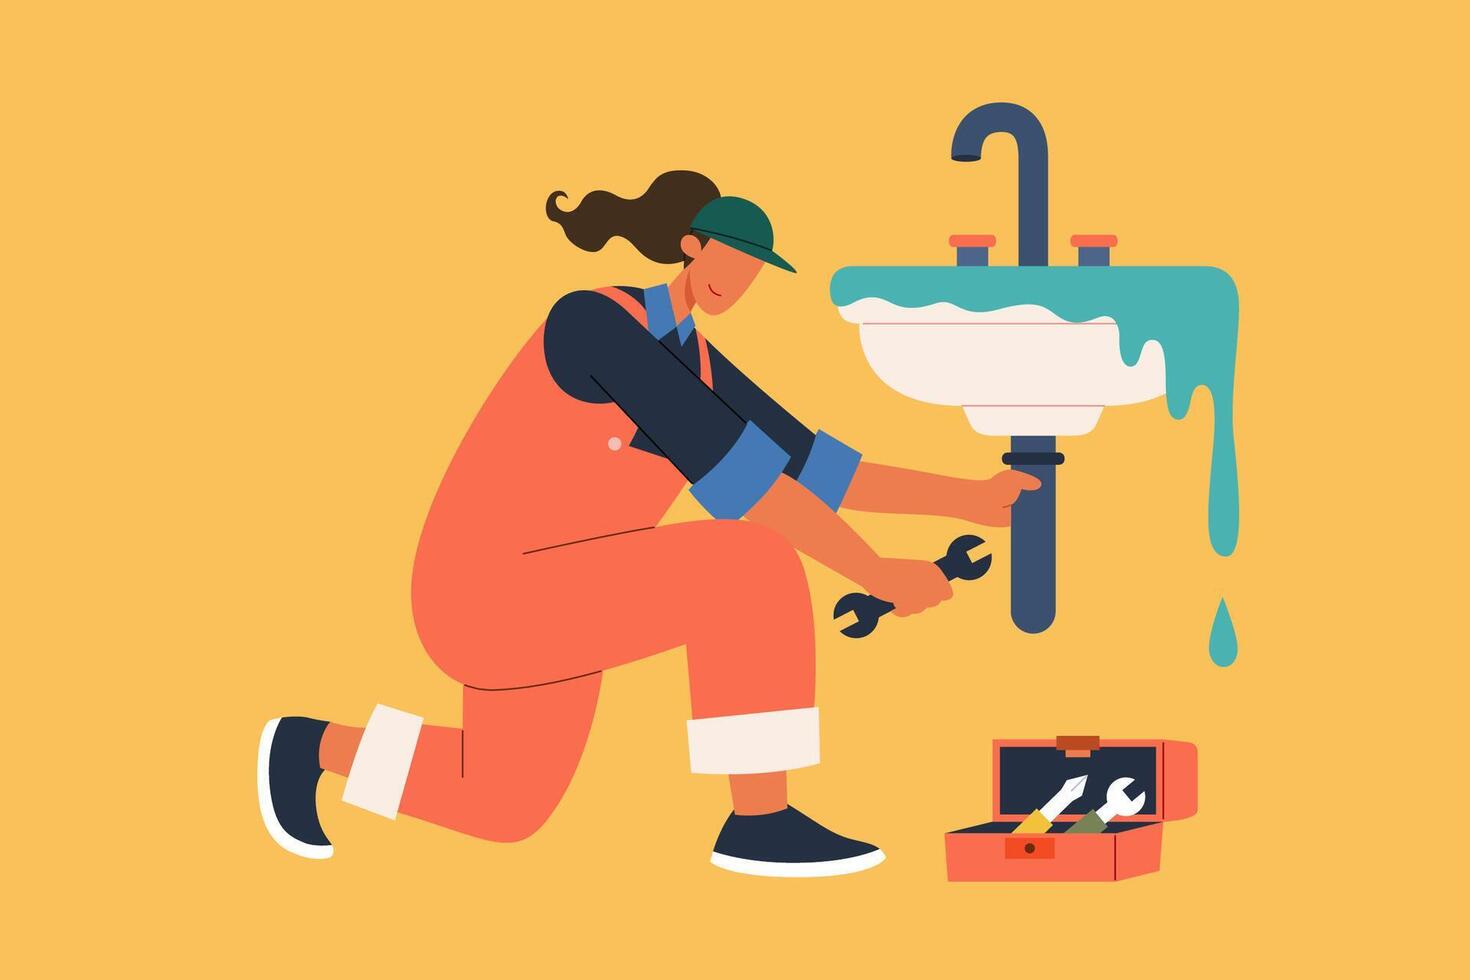 Female plumber fixing bathroom sink. Flat style illustration of plumber woman in workwear fixing sink tube pipe in bathroom over orange background. Concept of woman at work vector